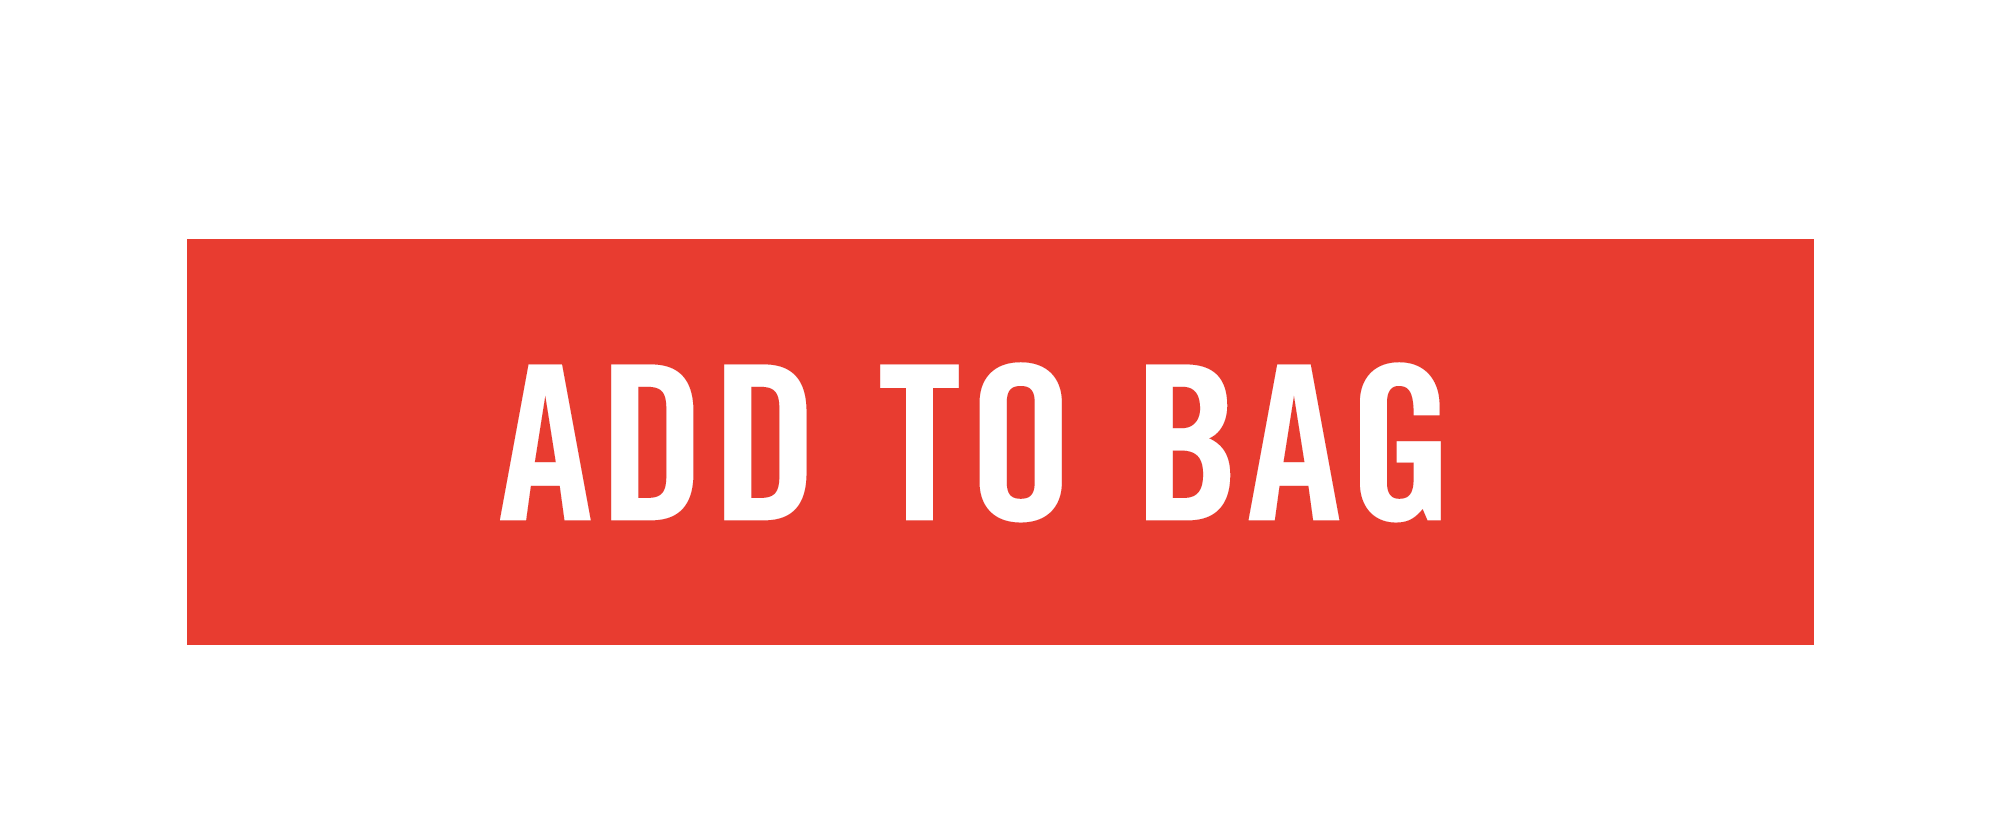 add to bag